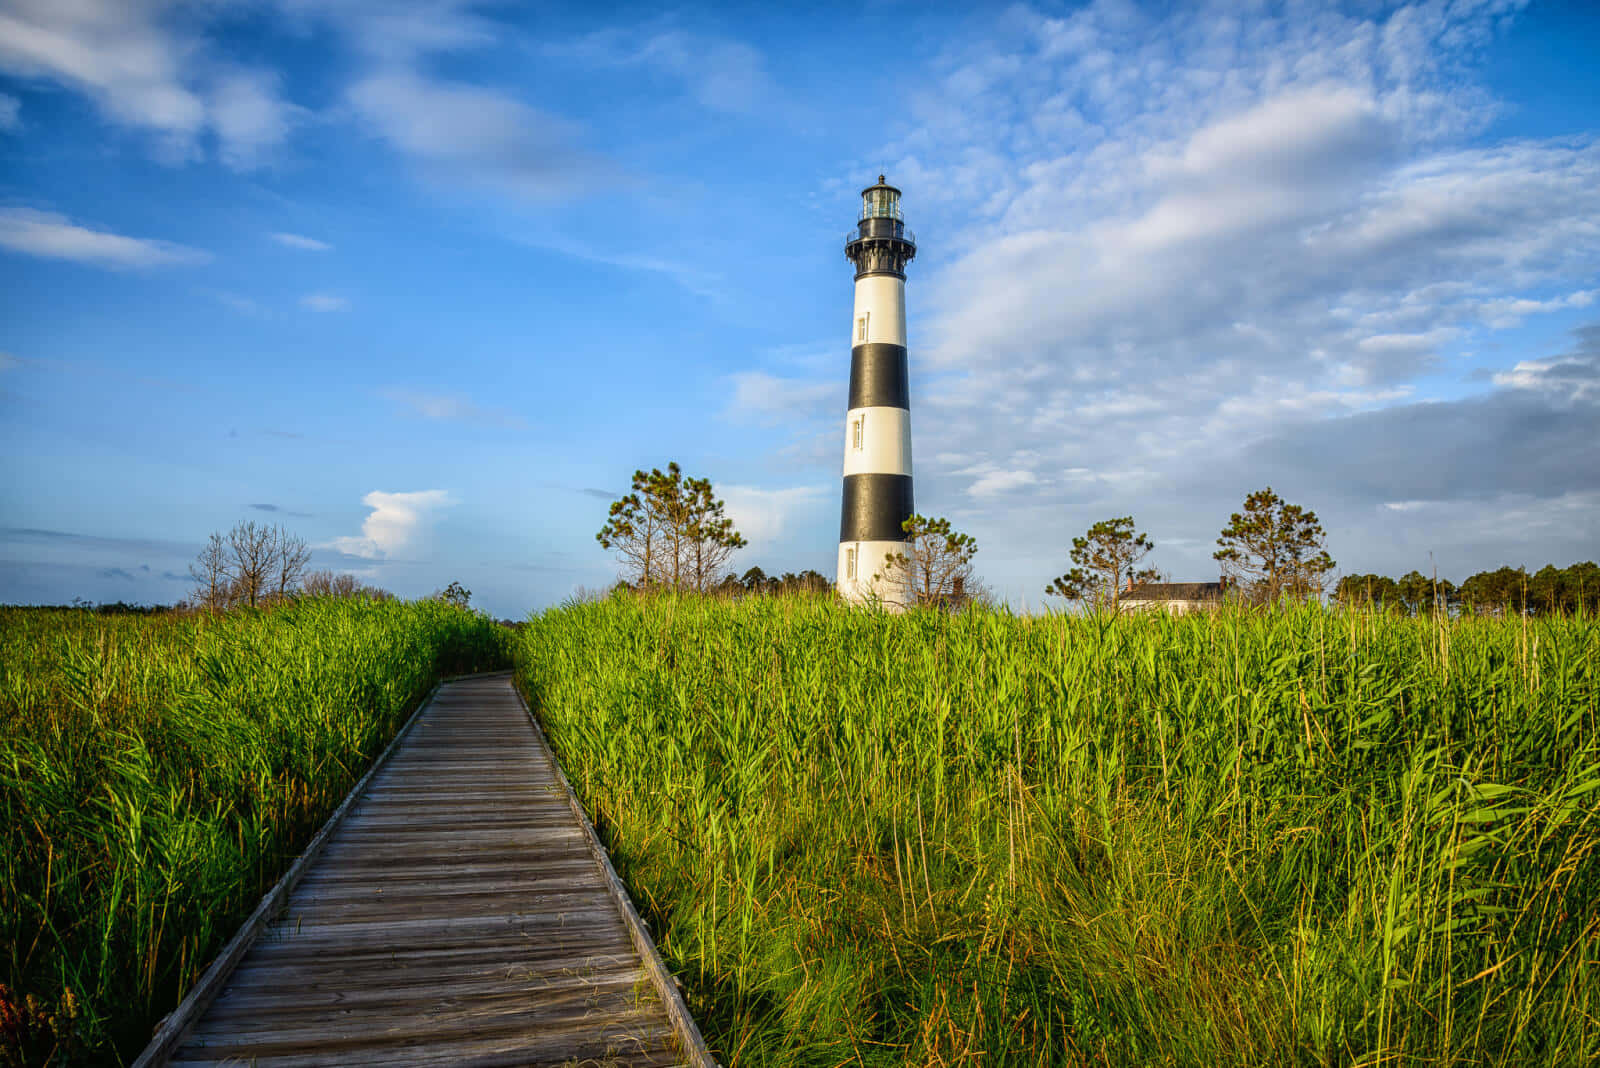 Explore the Outer Banks and enjoy its breathtaking landscape and serene beauty